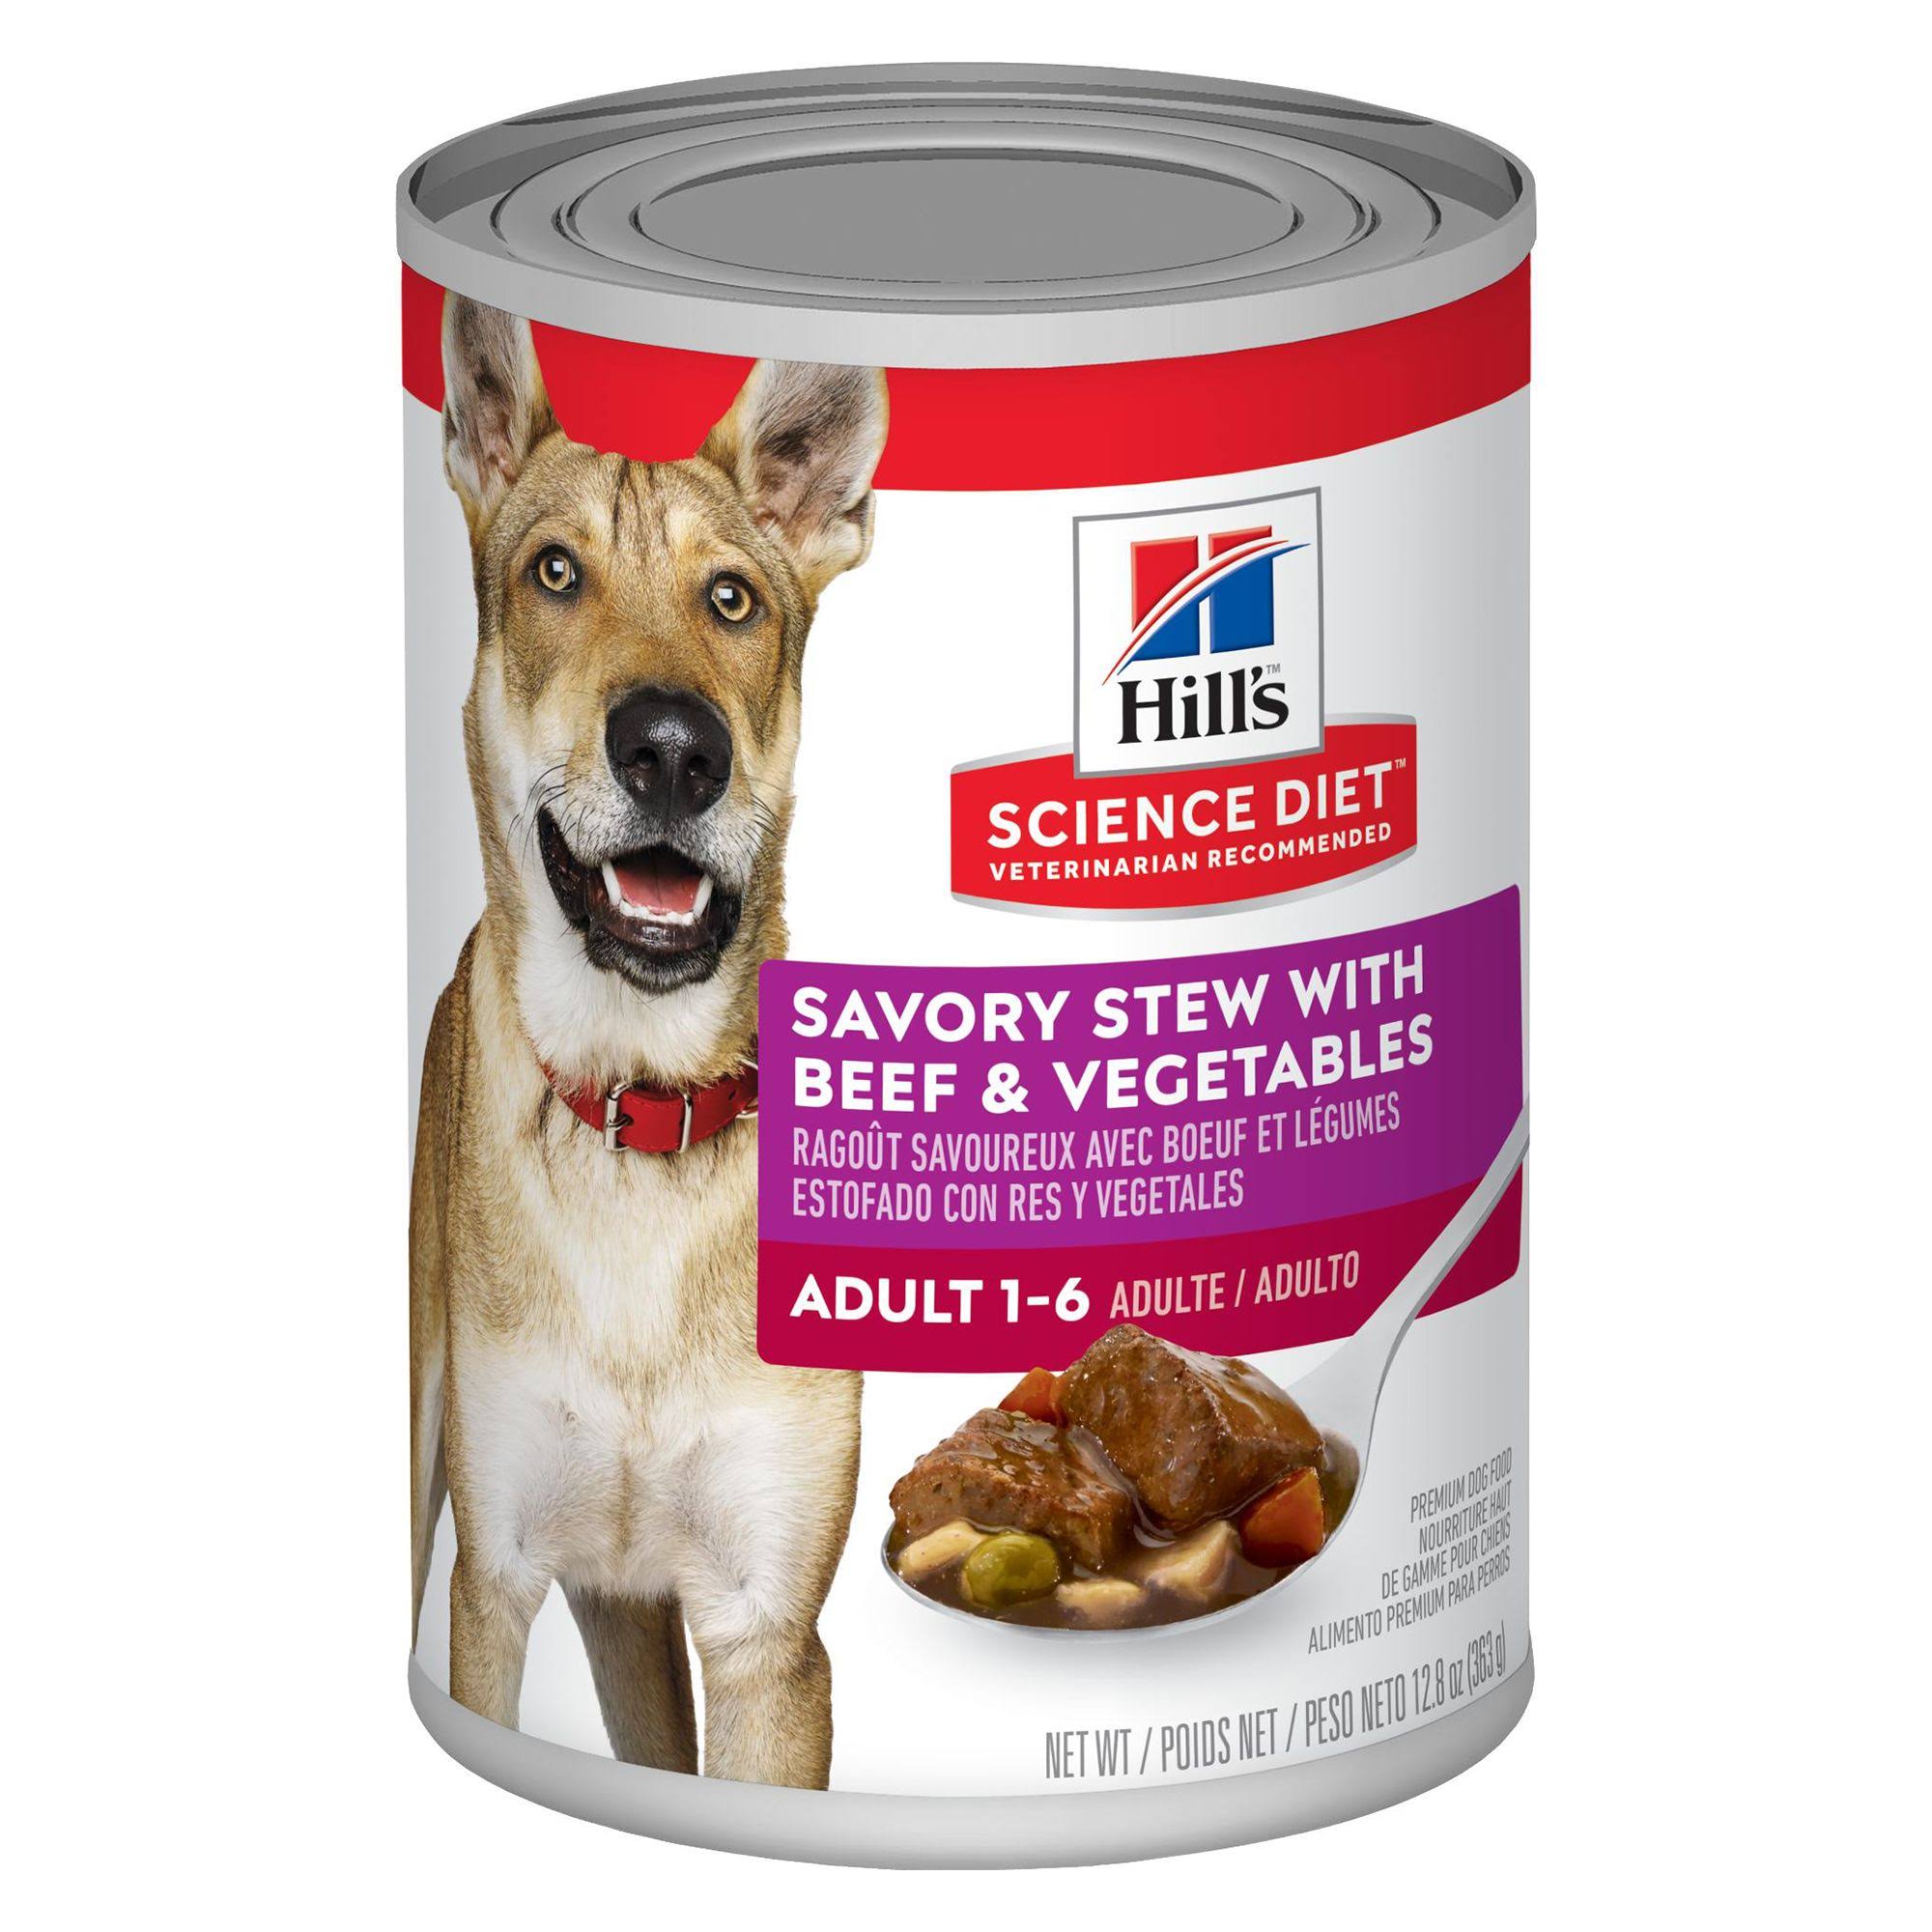 Hill's Science Diet Adult Savory Stew with Beef and Vegetables Canned Dog Food - 12.8oz